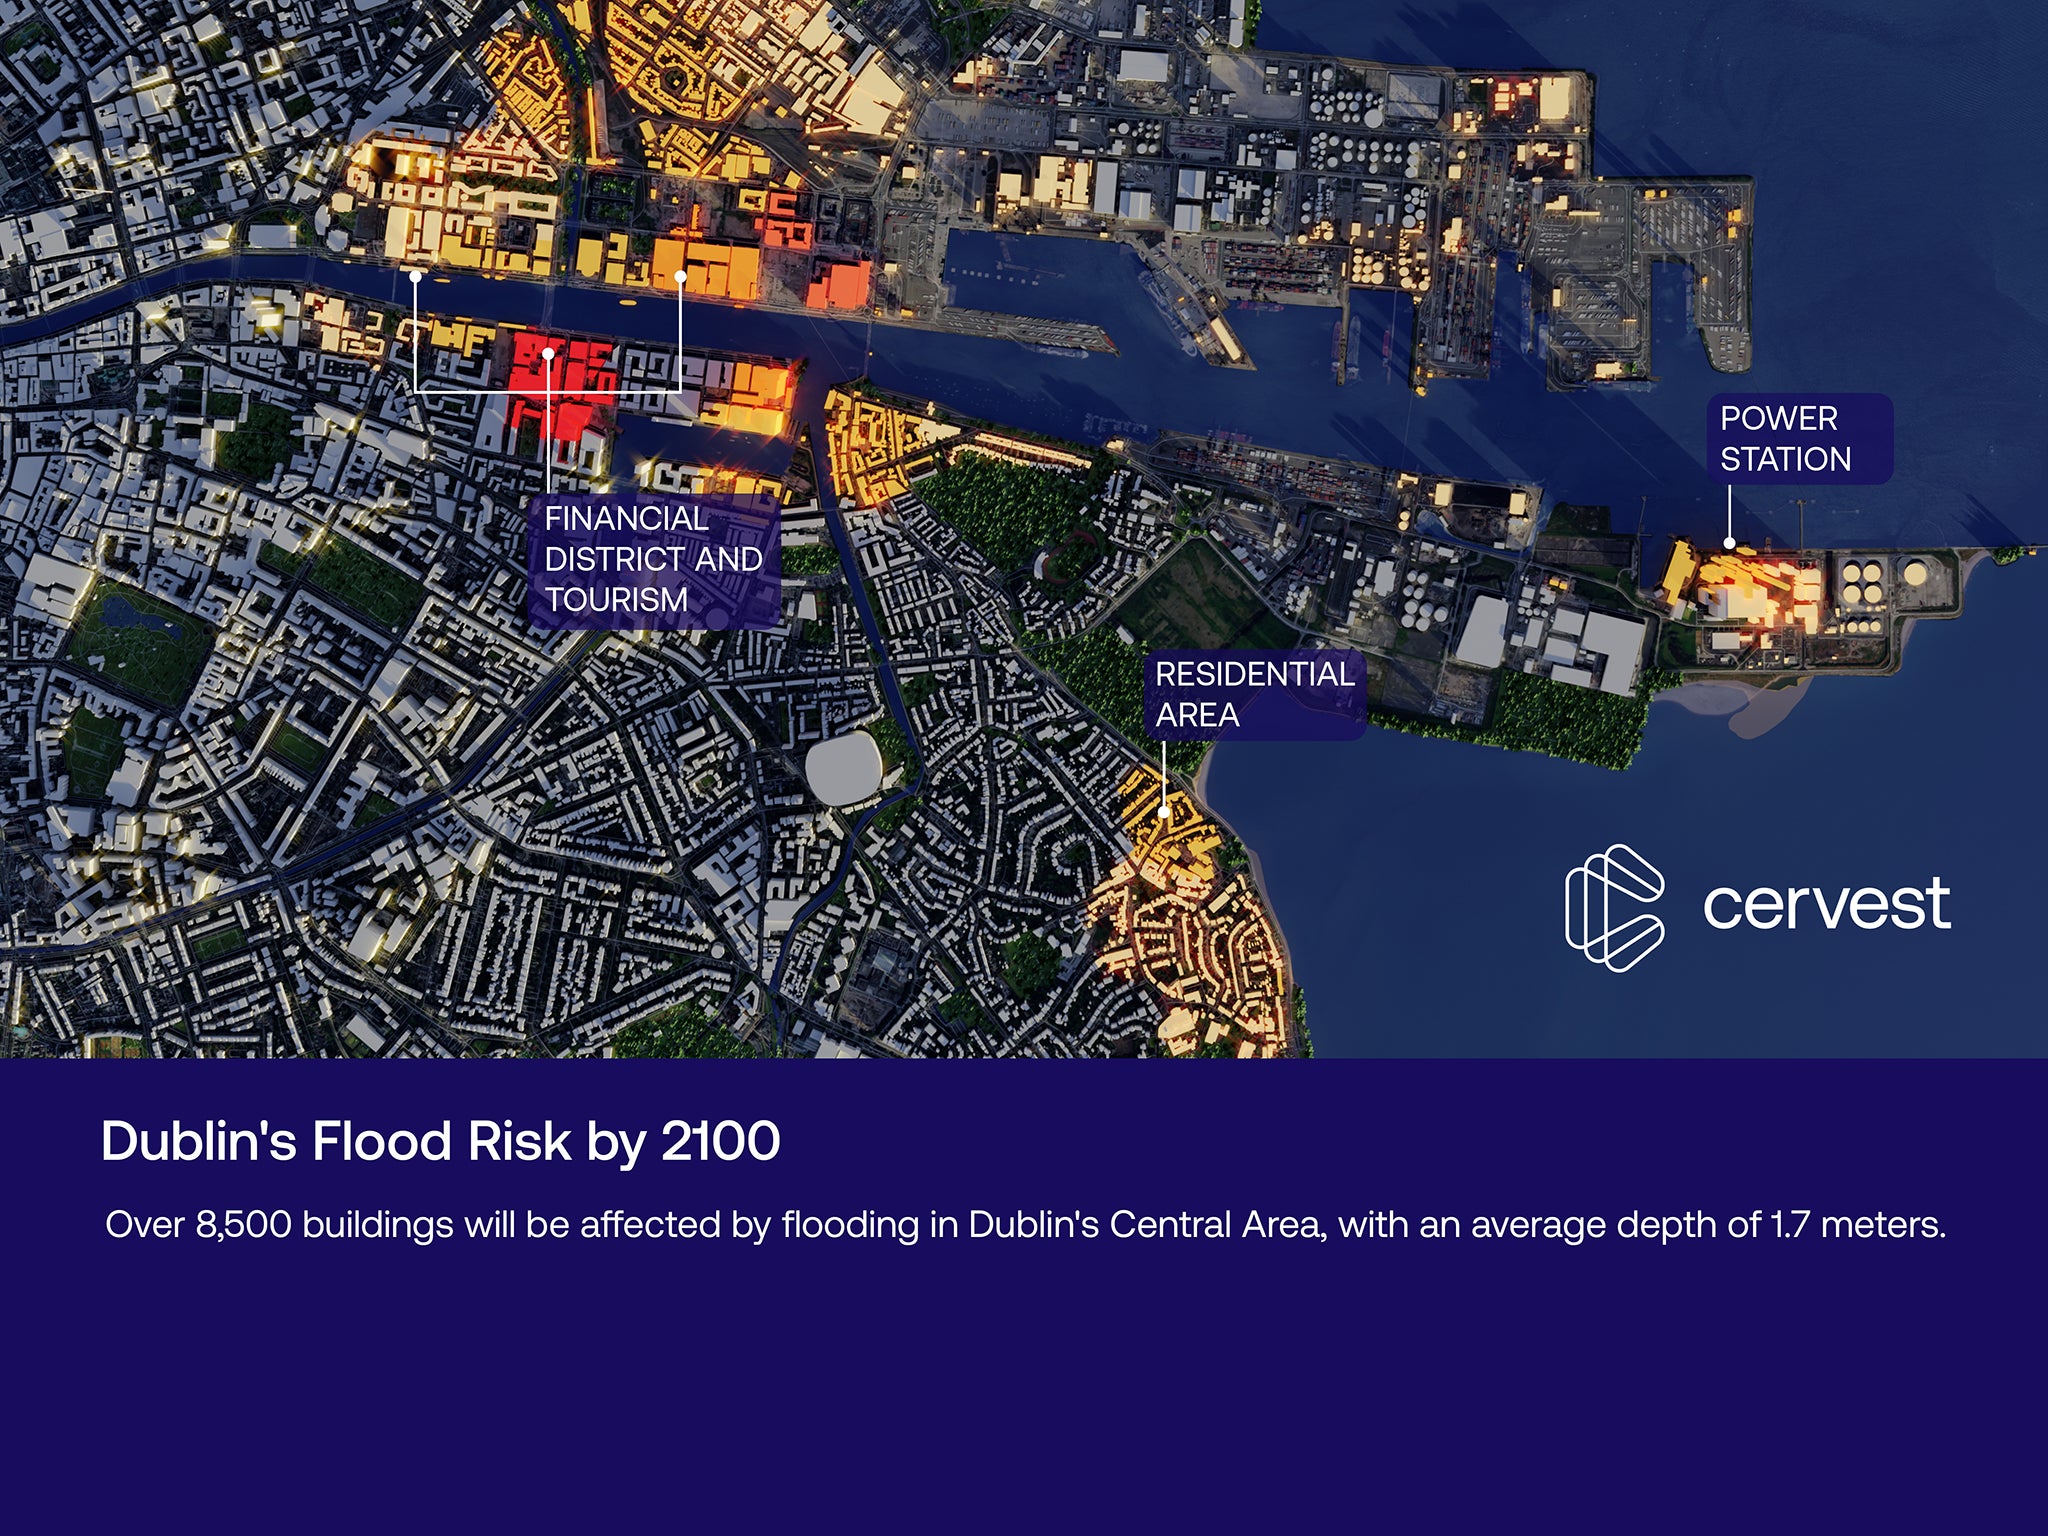 A data visualisation image from Cervest shows that thousands of buildings in Dublin will be at risk of coastal flooding by 2100